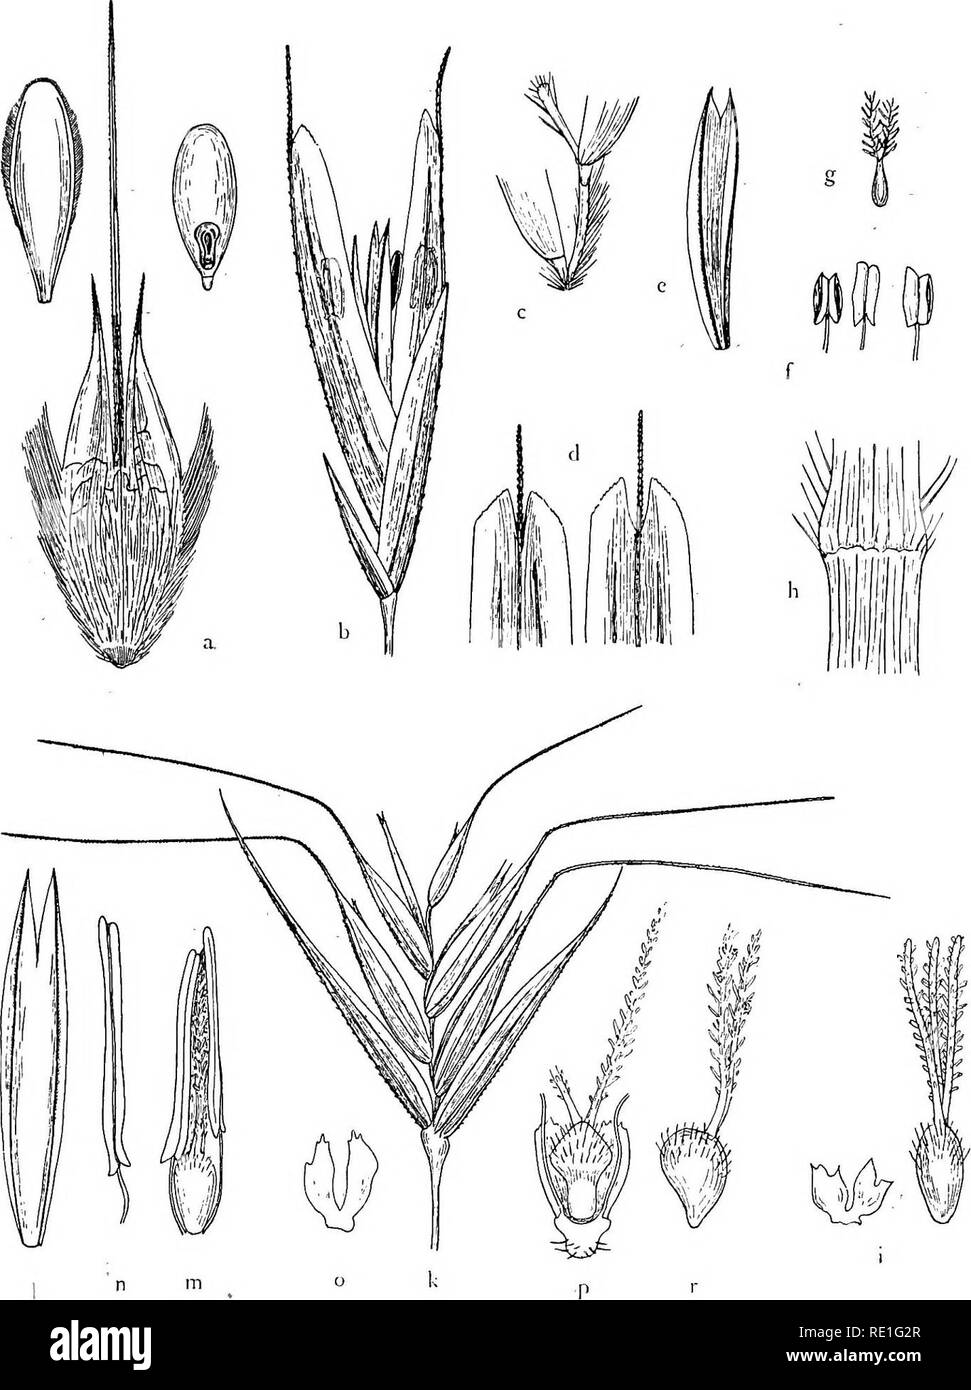 . The phanerogams of the Juan Fernandez Islands. Botany. THE PHANEROGAMS OF THE JUAN FERNANDEZ ISLANDS 103. Fig. 2. a Danthonia collina, flowering glume with palea and caryopsis, X 5. b—h Koeleria micrathera:' b spikelet, c rhachis with rudimentary flower, d tips of two flowering glumes, e palea, f anthers, g pistil, all X 10, h ligule, X nf i Bromus fernandezianus, pistil and lodicules, X 10. k—r B. masafueranus: k spikelet, X j{,1 palea, m pollination, n anther,.all X 5; o lodicules, p flower, r pistil-from the side, all X 10. Barril, 985 m; lower slopes of Los Inocentes, open space in fern  Stock Photo